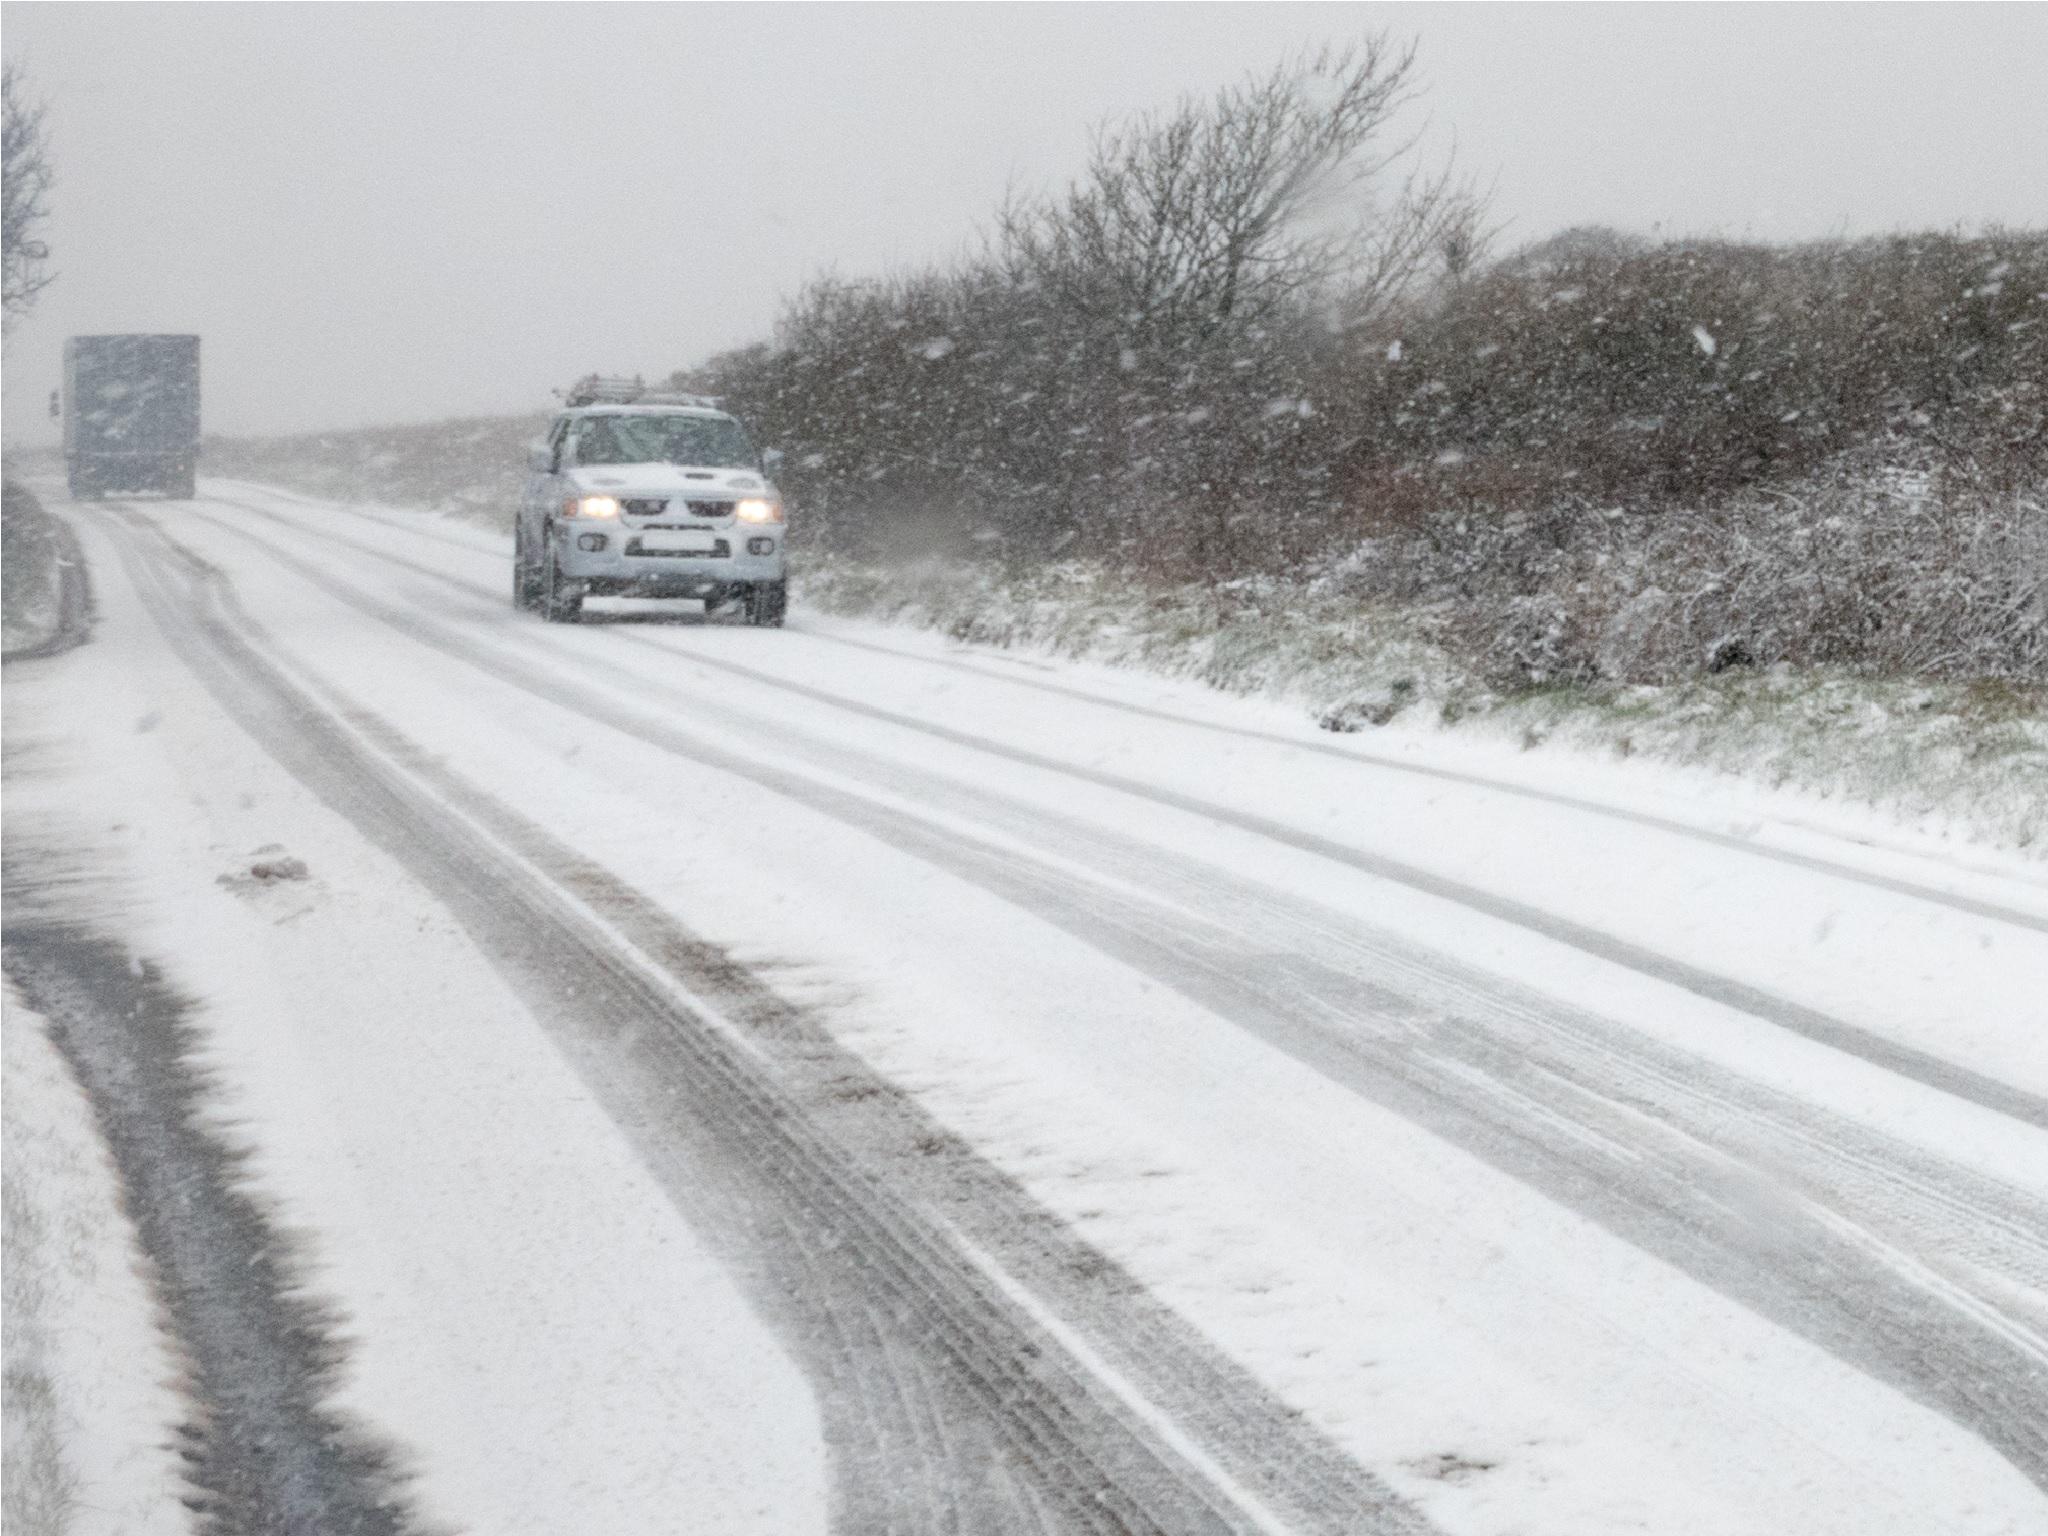 Cornwall has been hit with heavy snow